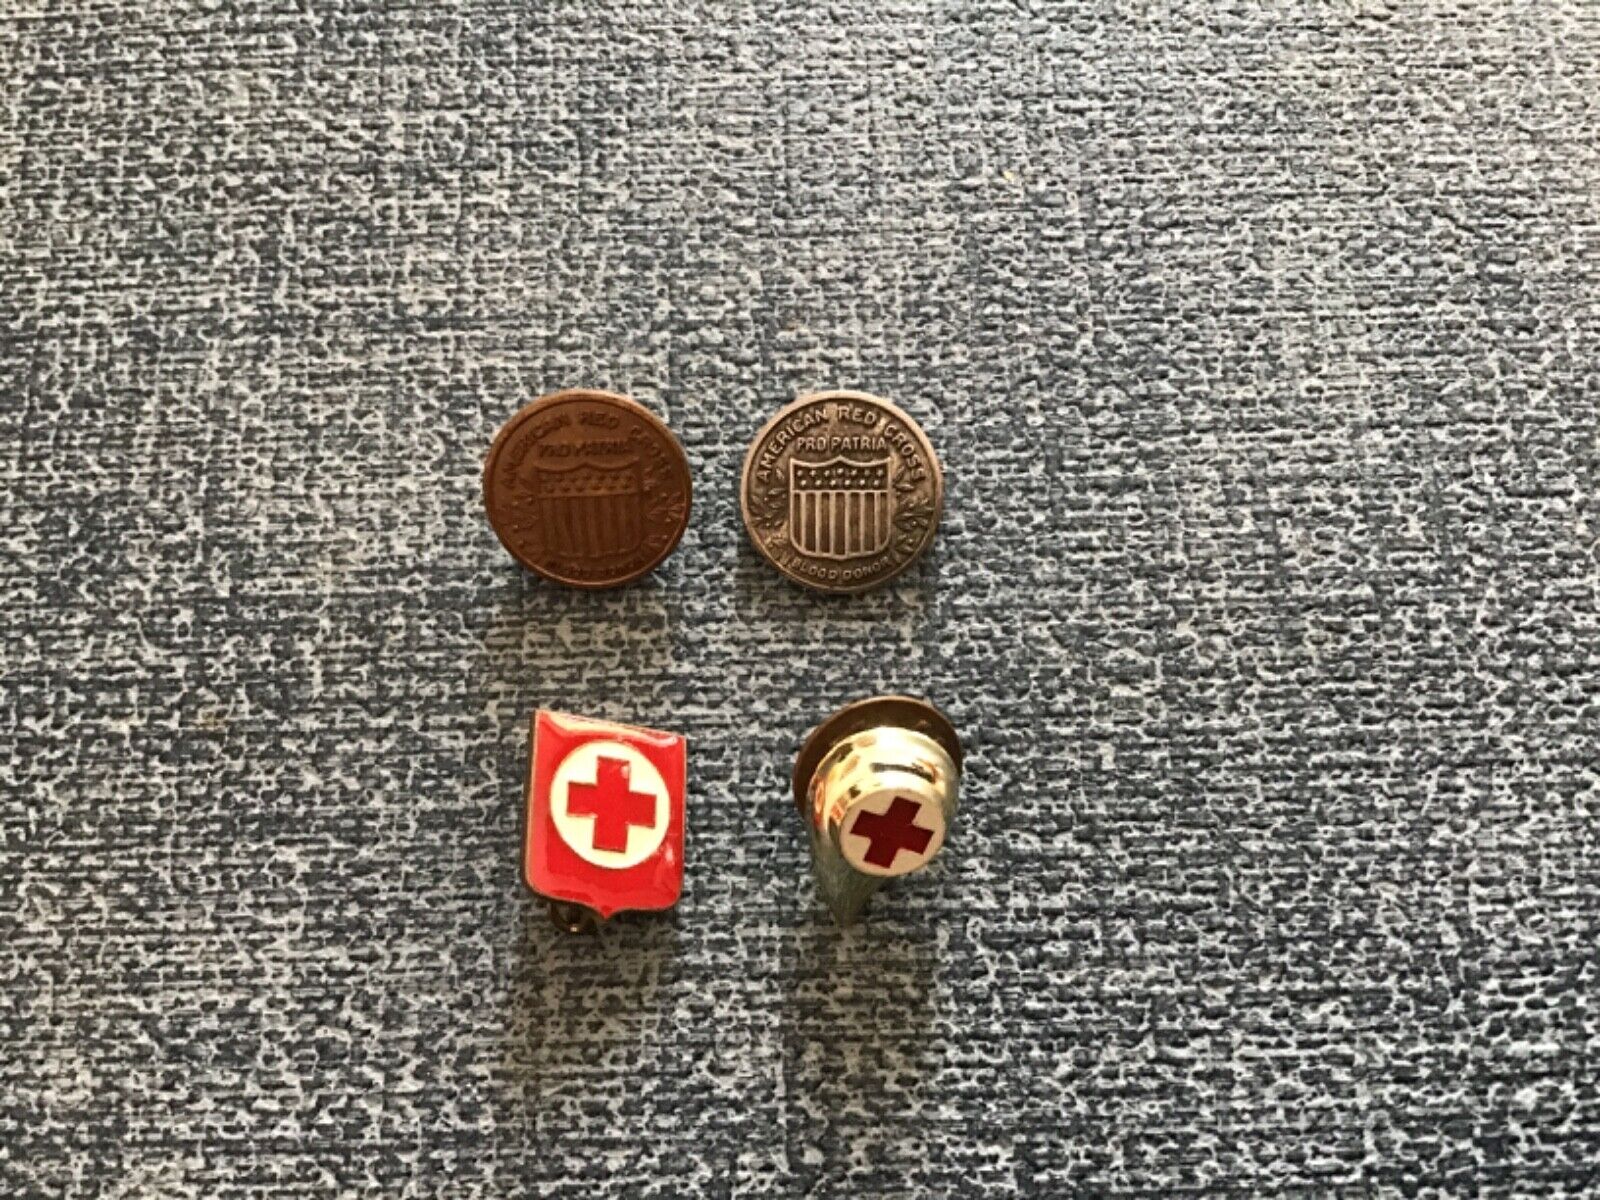 American Red Cross 4 small blood donor pins